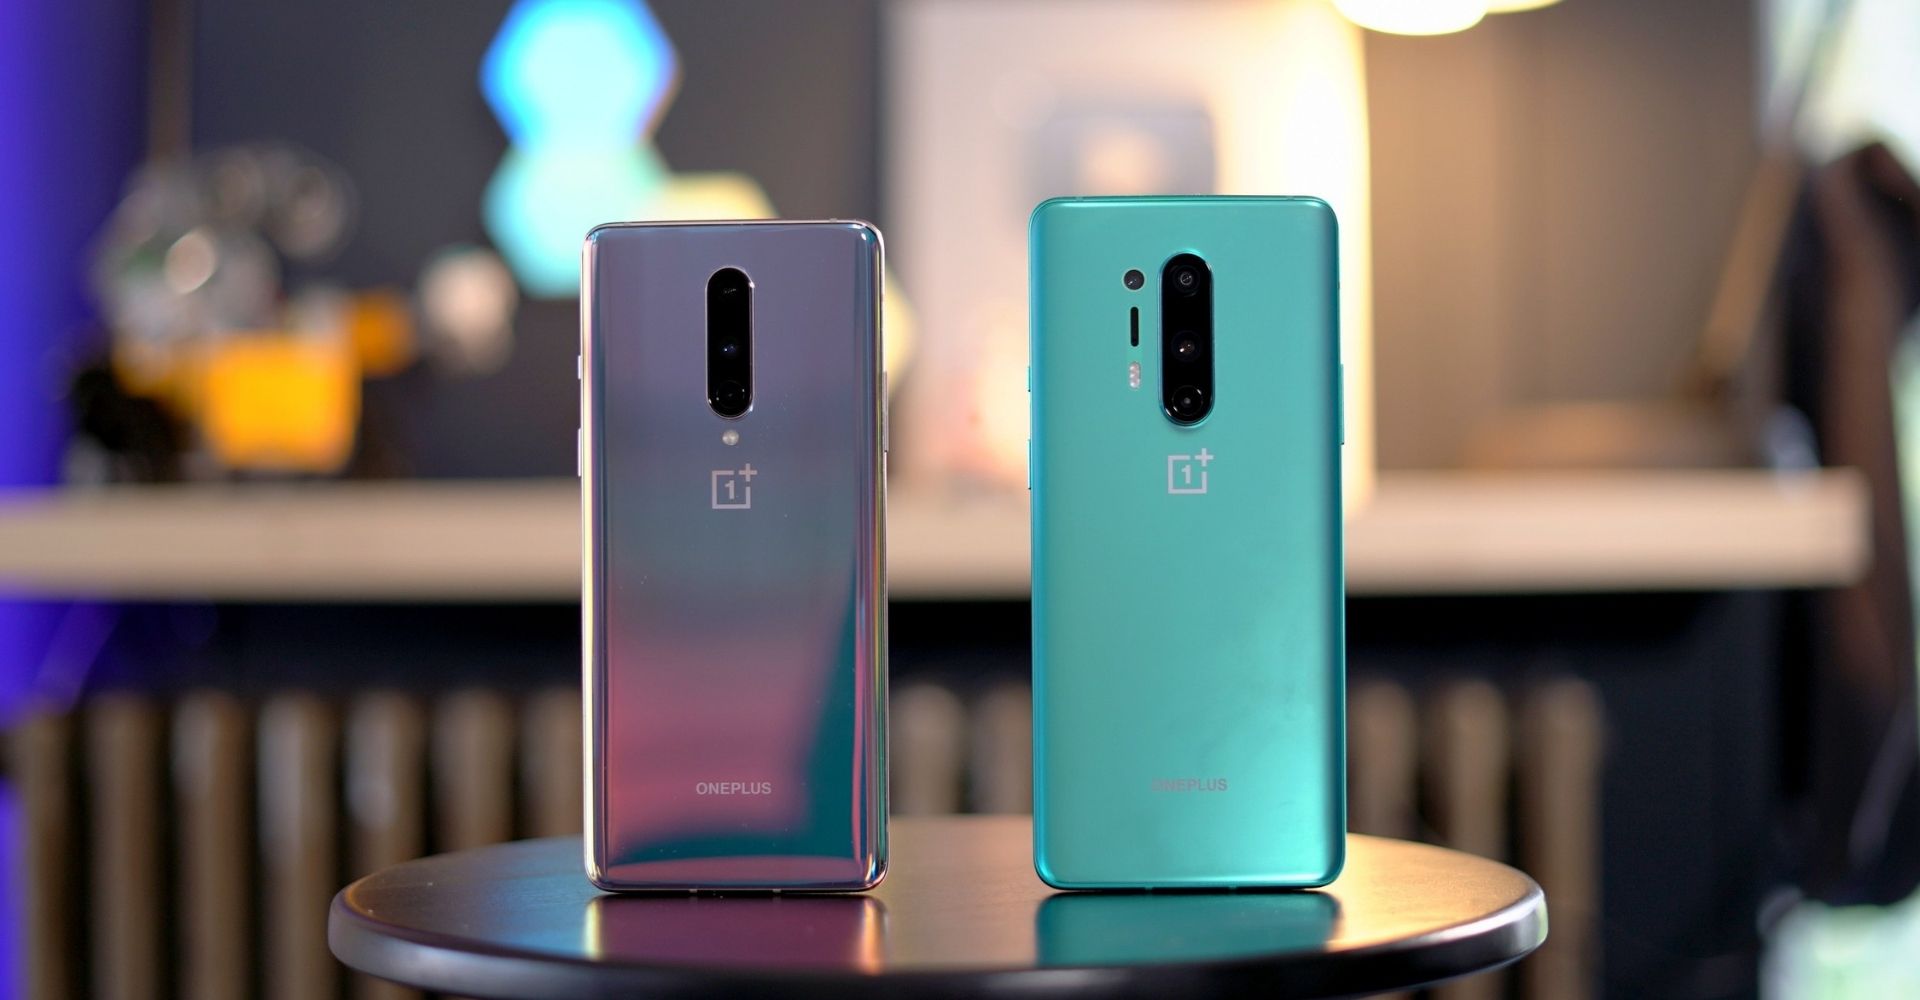 Android 12 Update: Expected Release For Oneplus 8